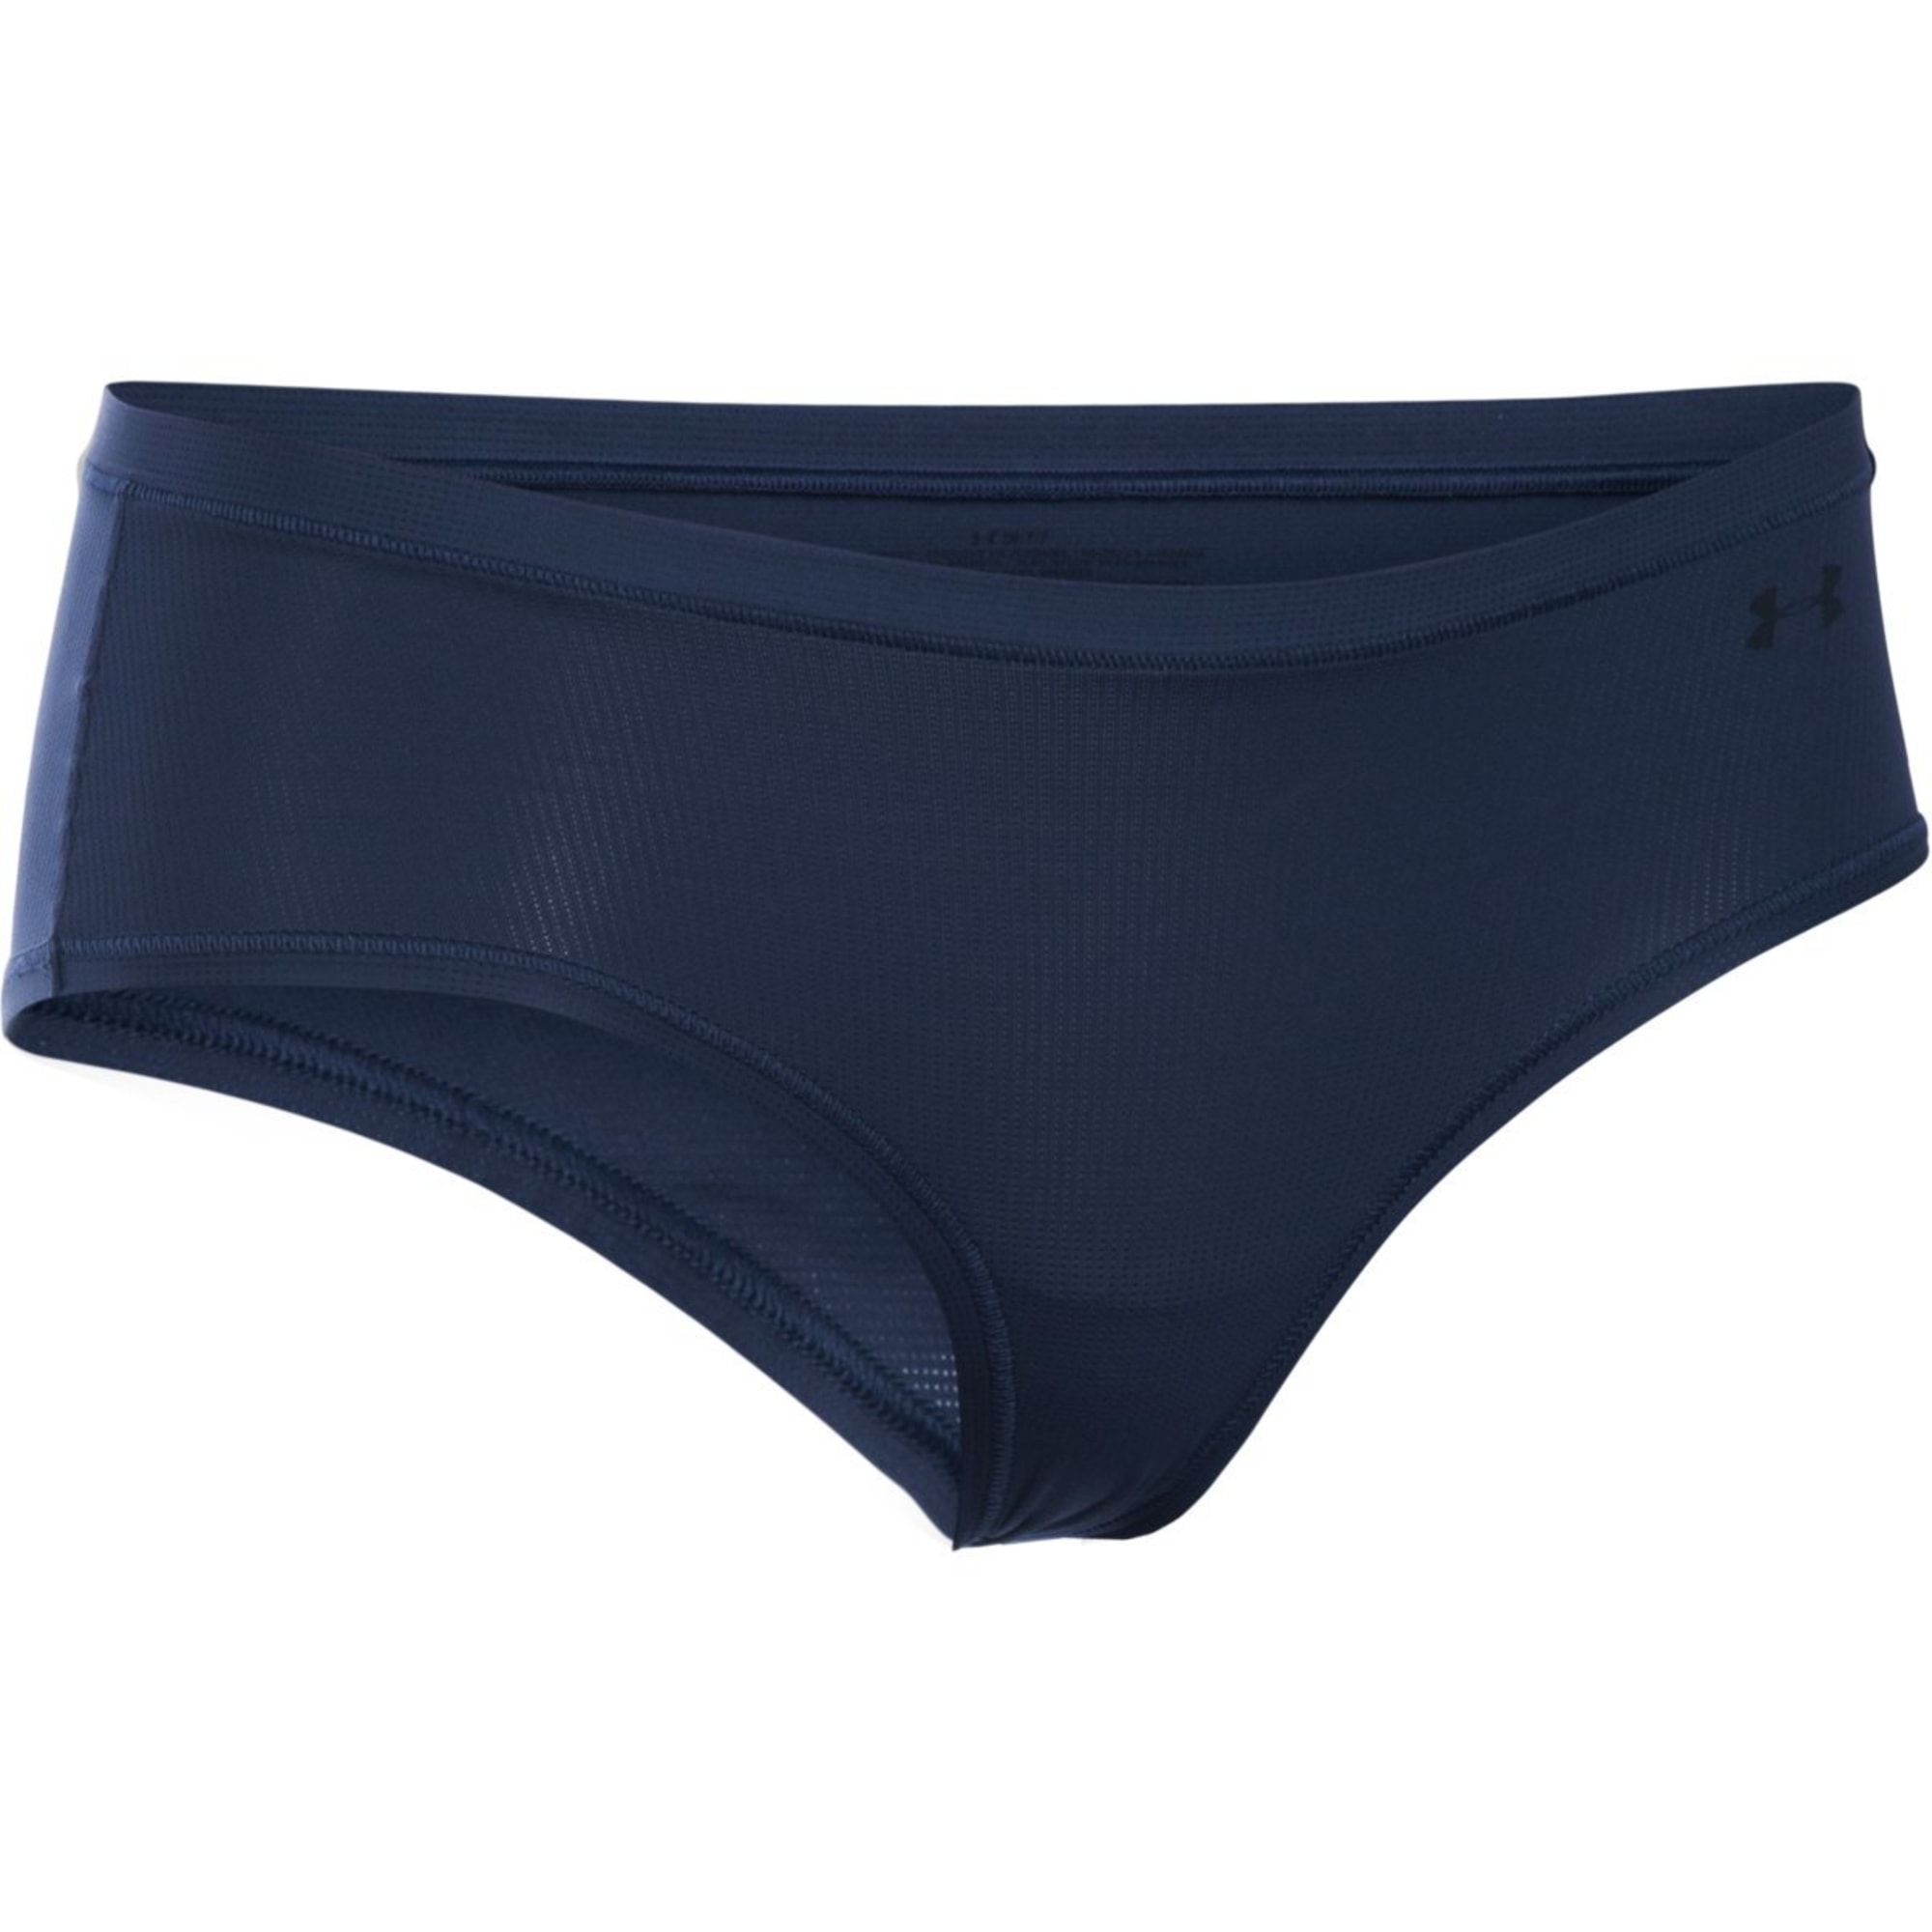 UNDER ARMOUR Women's Pure Stretch Sheer Hipster Underwear - Bob's Stores